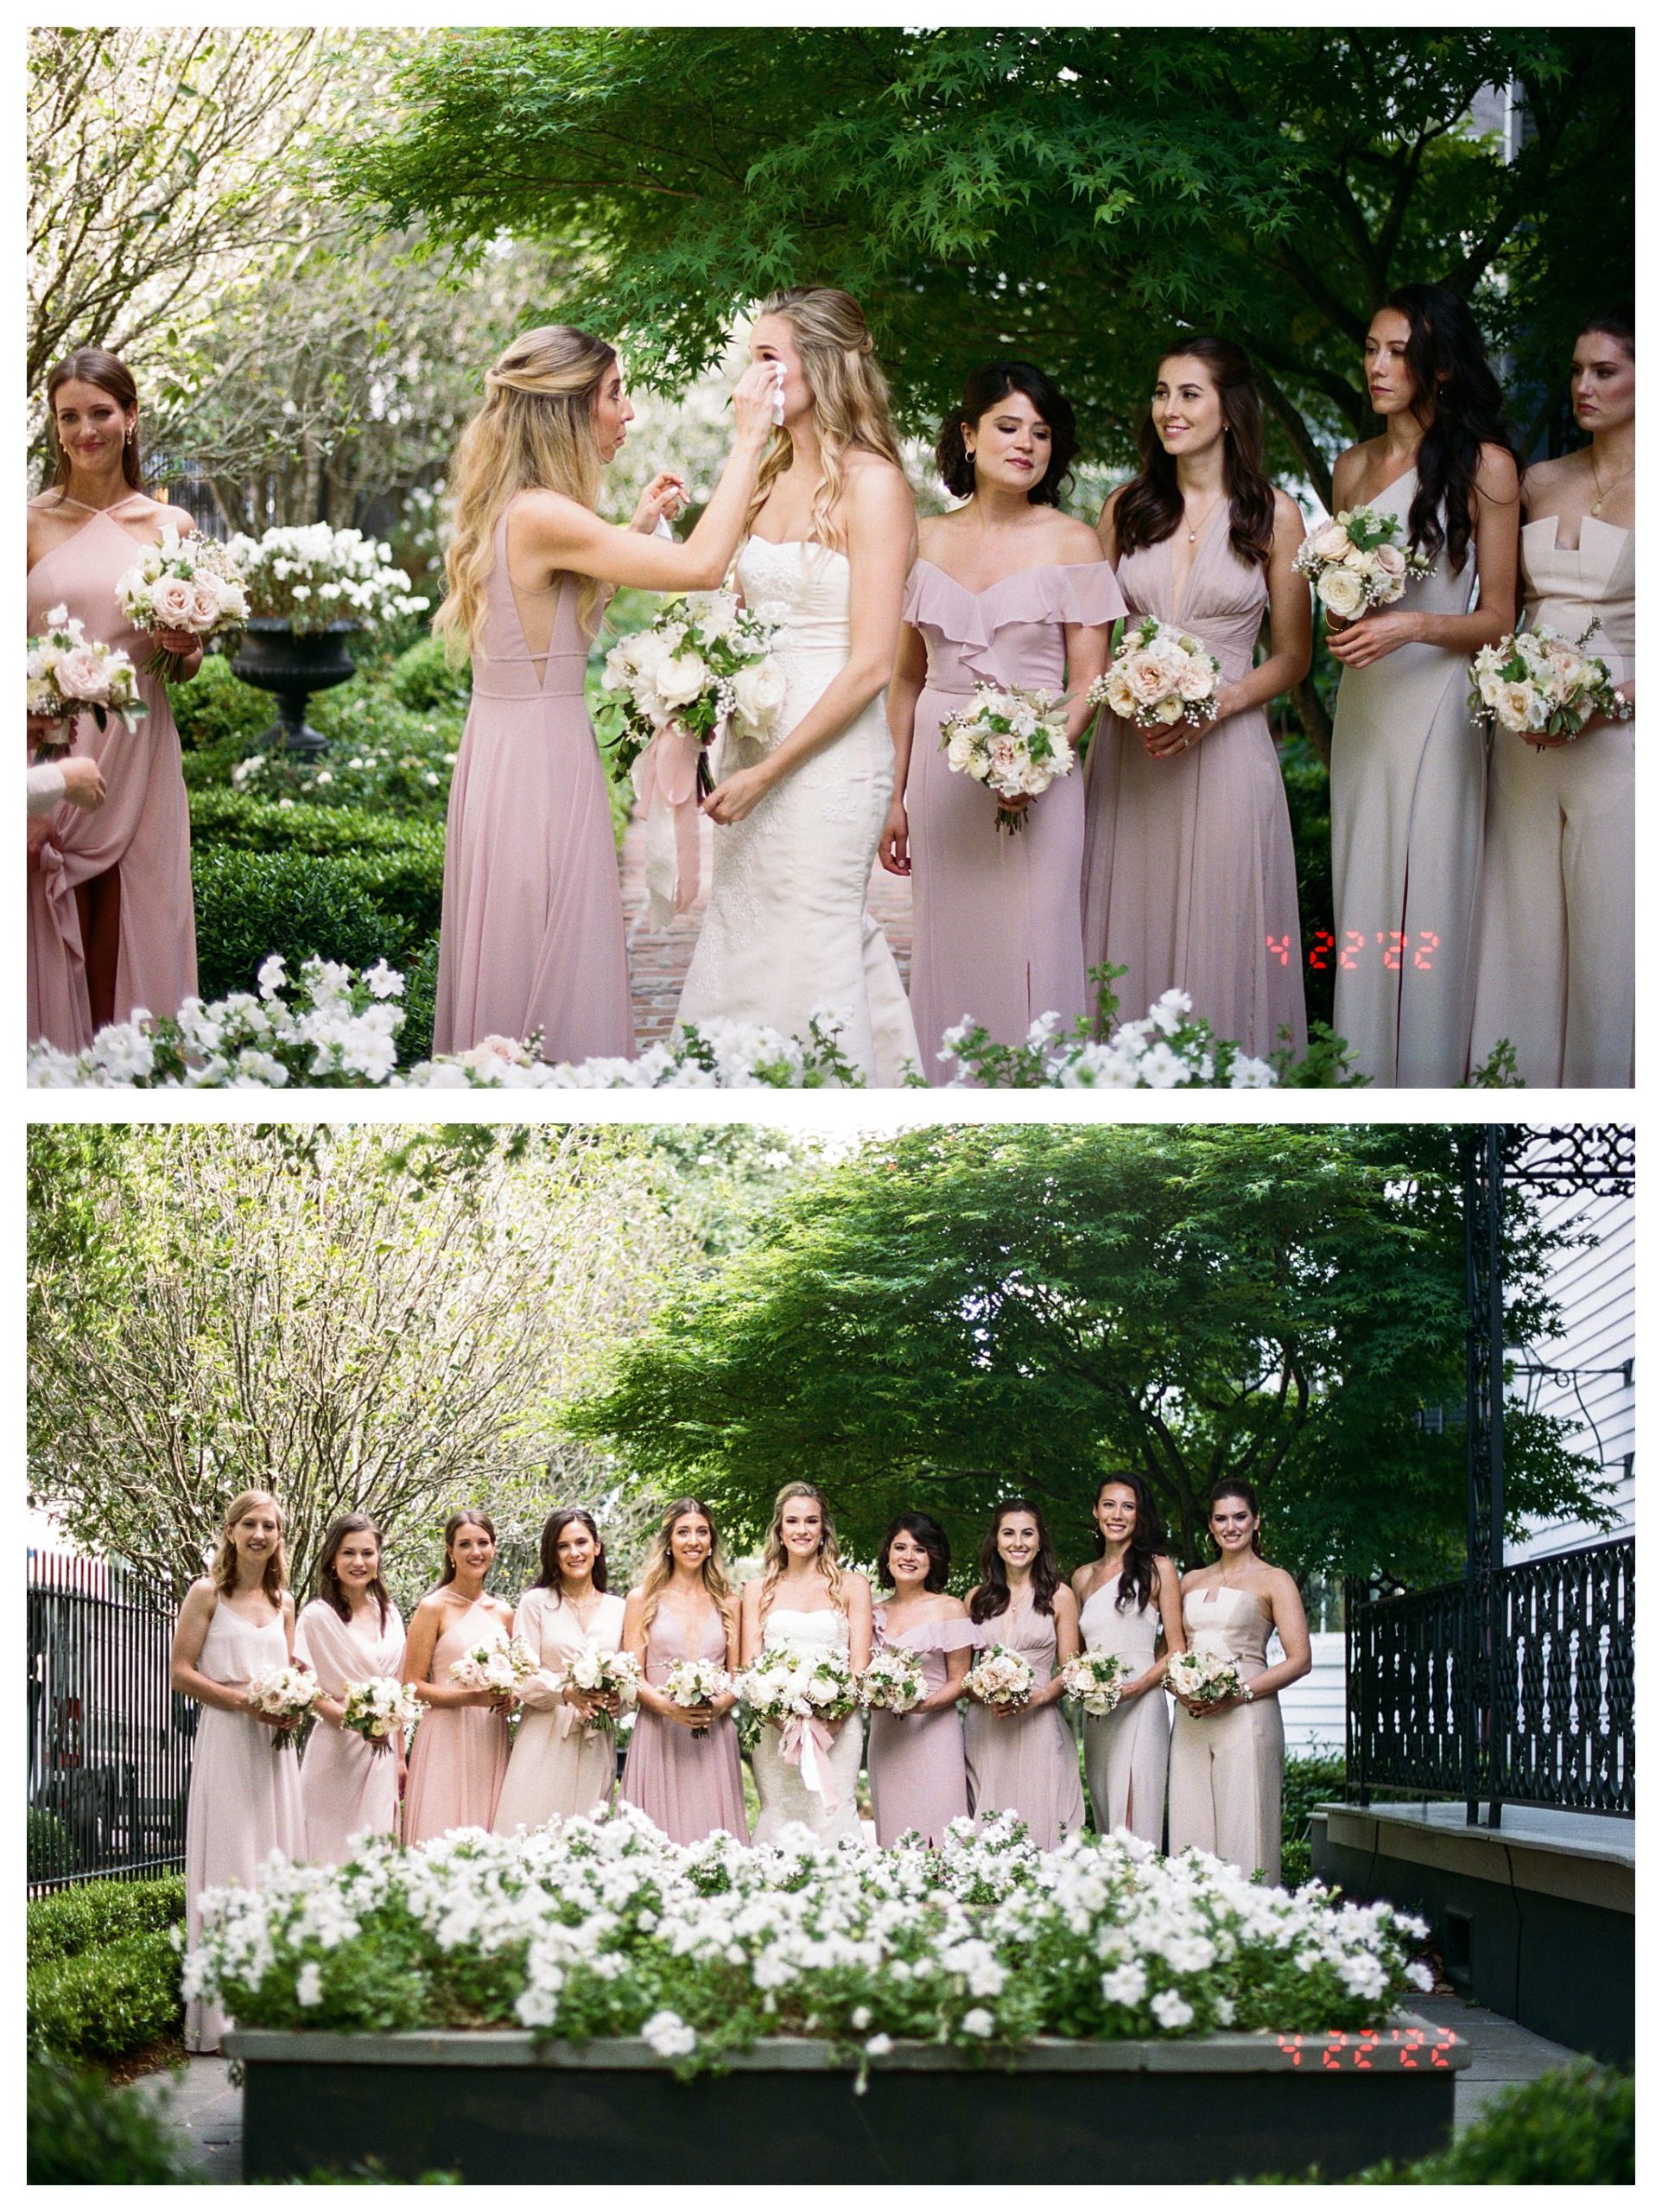 The bride poses with her bridesmaids holding flowers.